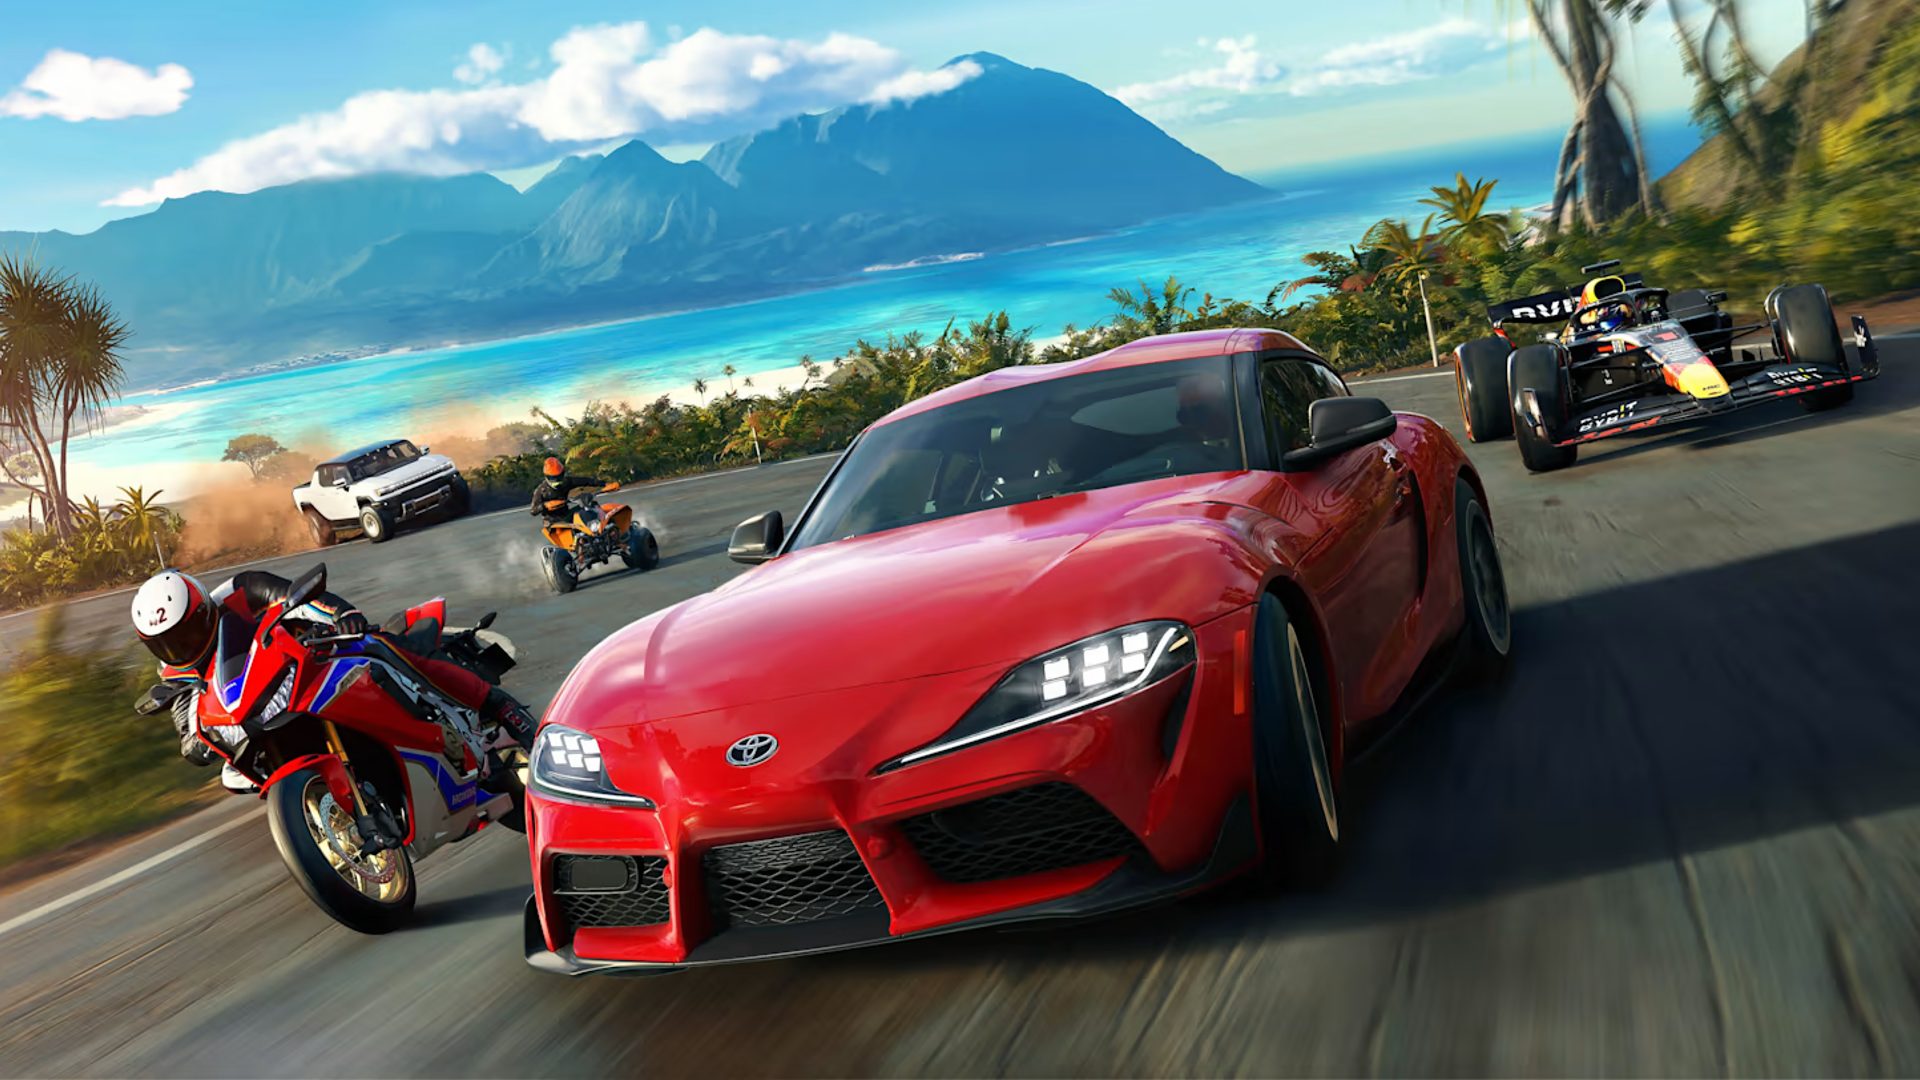 The Crew Motorfest is Ubisoft going full gas, no brakes